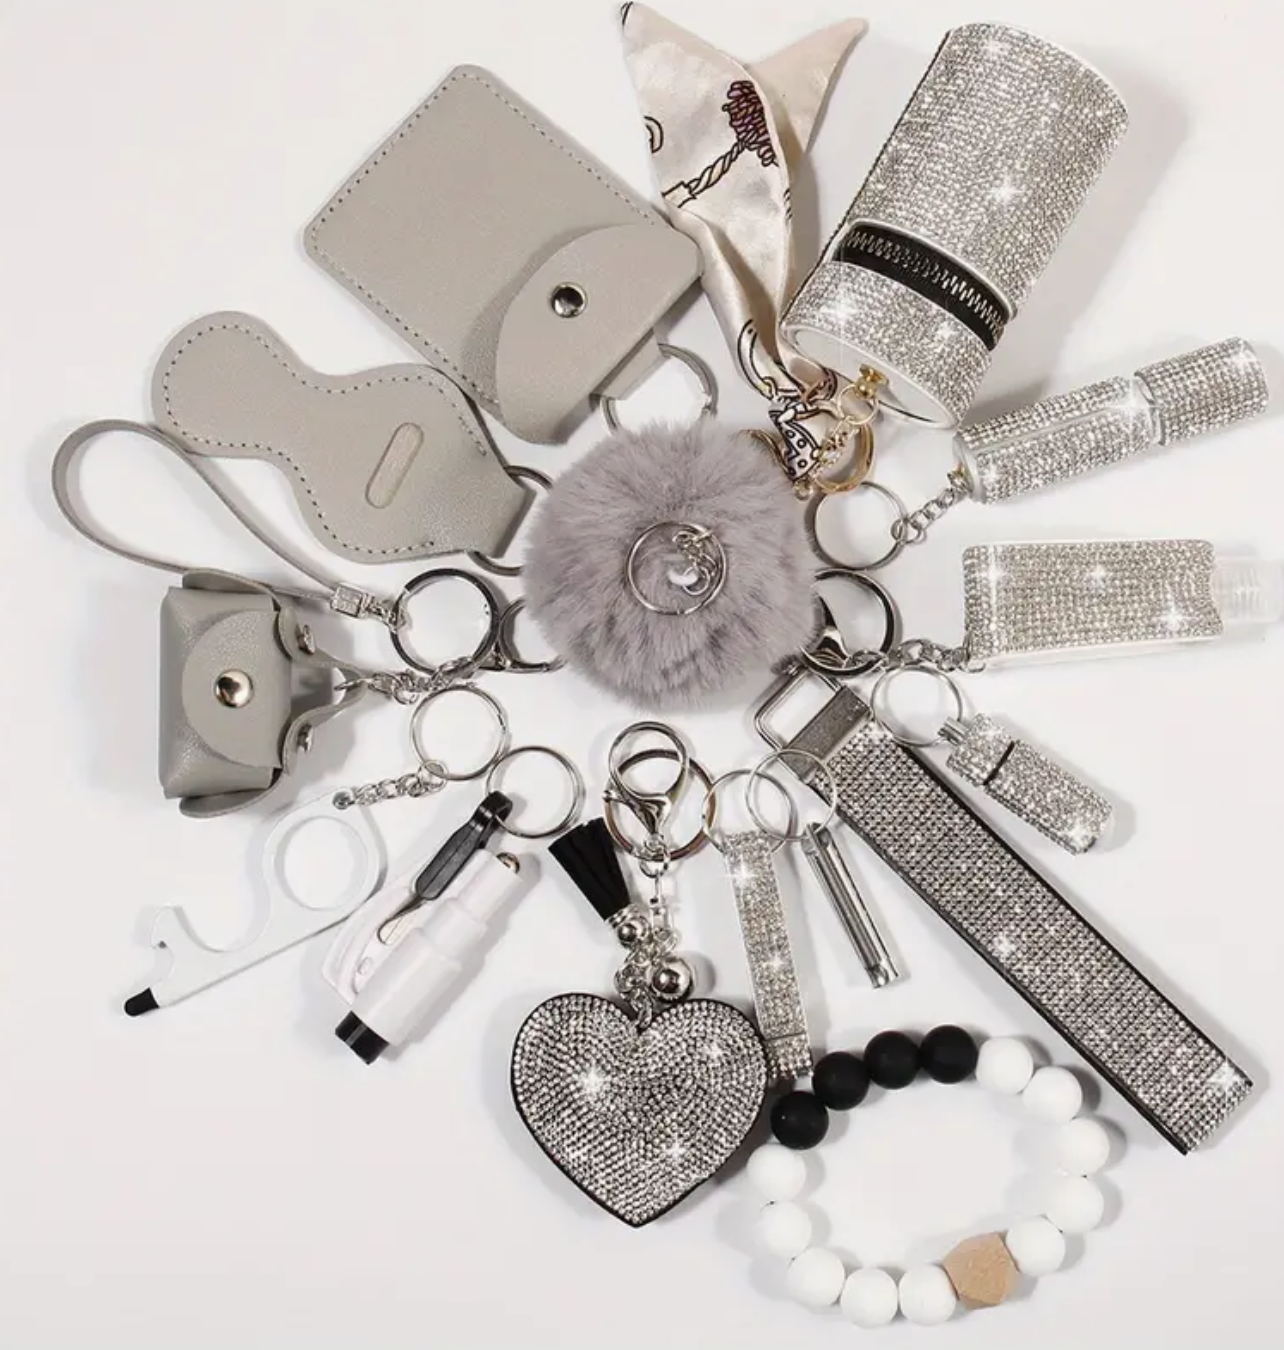 Fashion Bling Keychain Sets 15pcs (Different Styles)